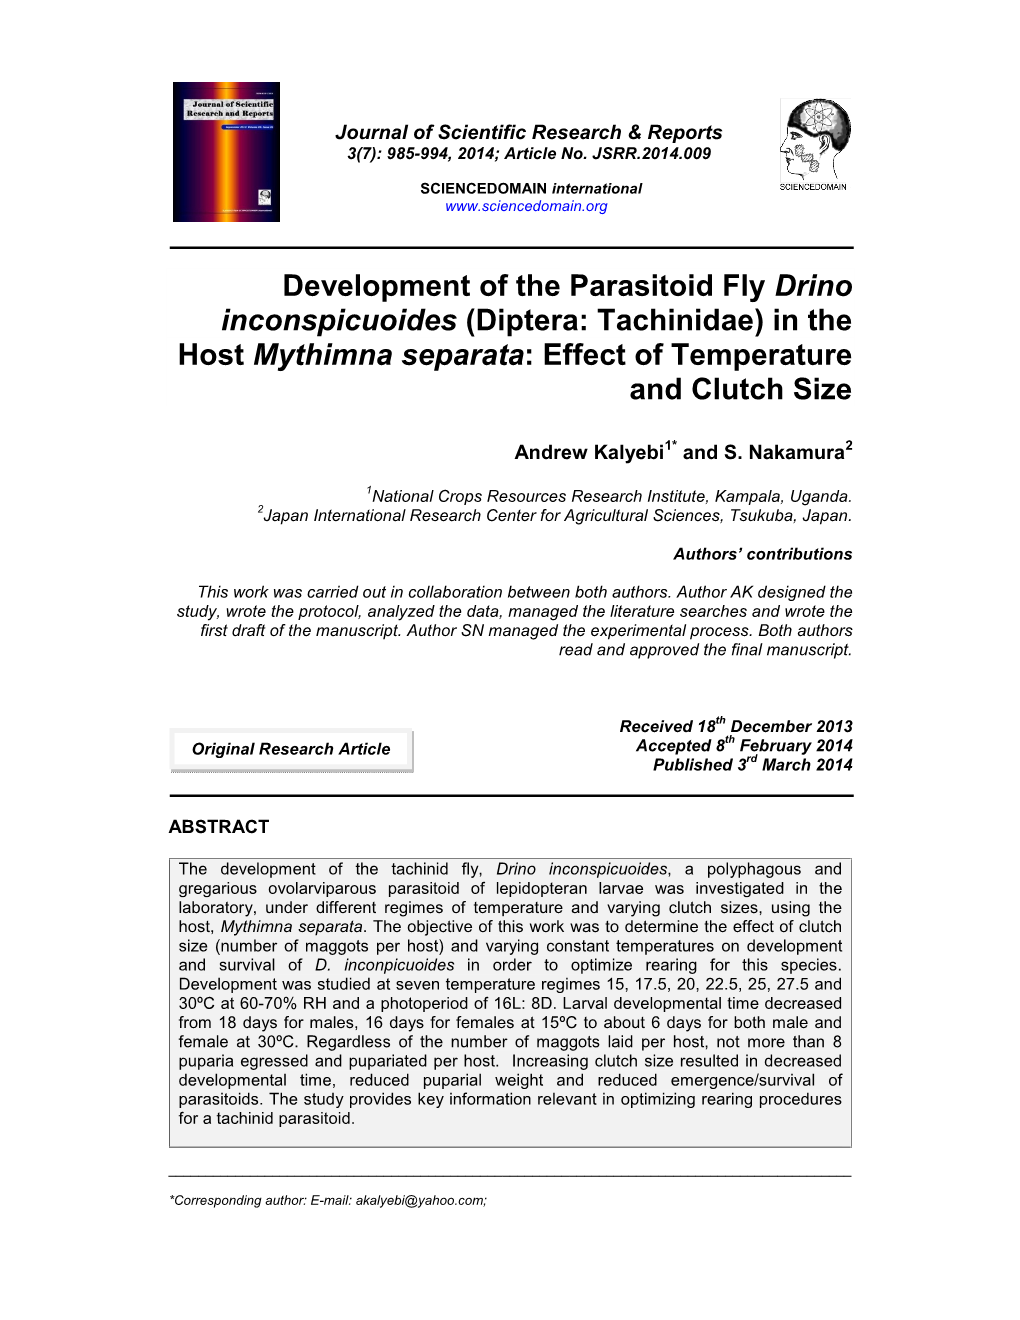 In the Host Mythimna Separata: Effect of Temperature and Clutch Size